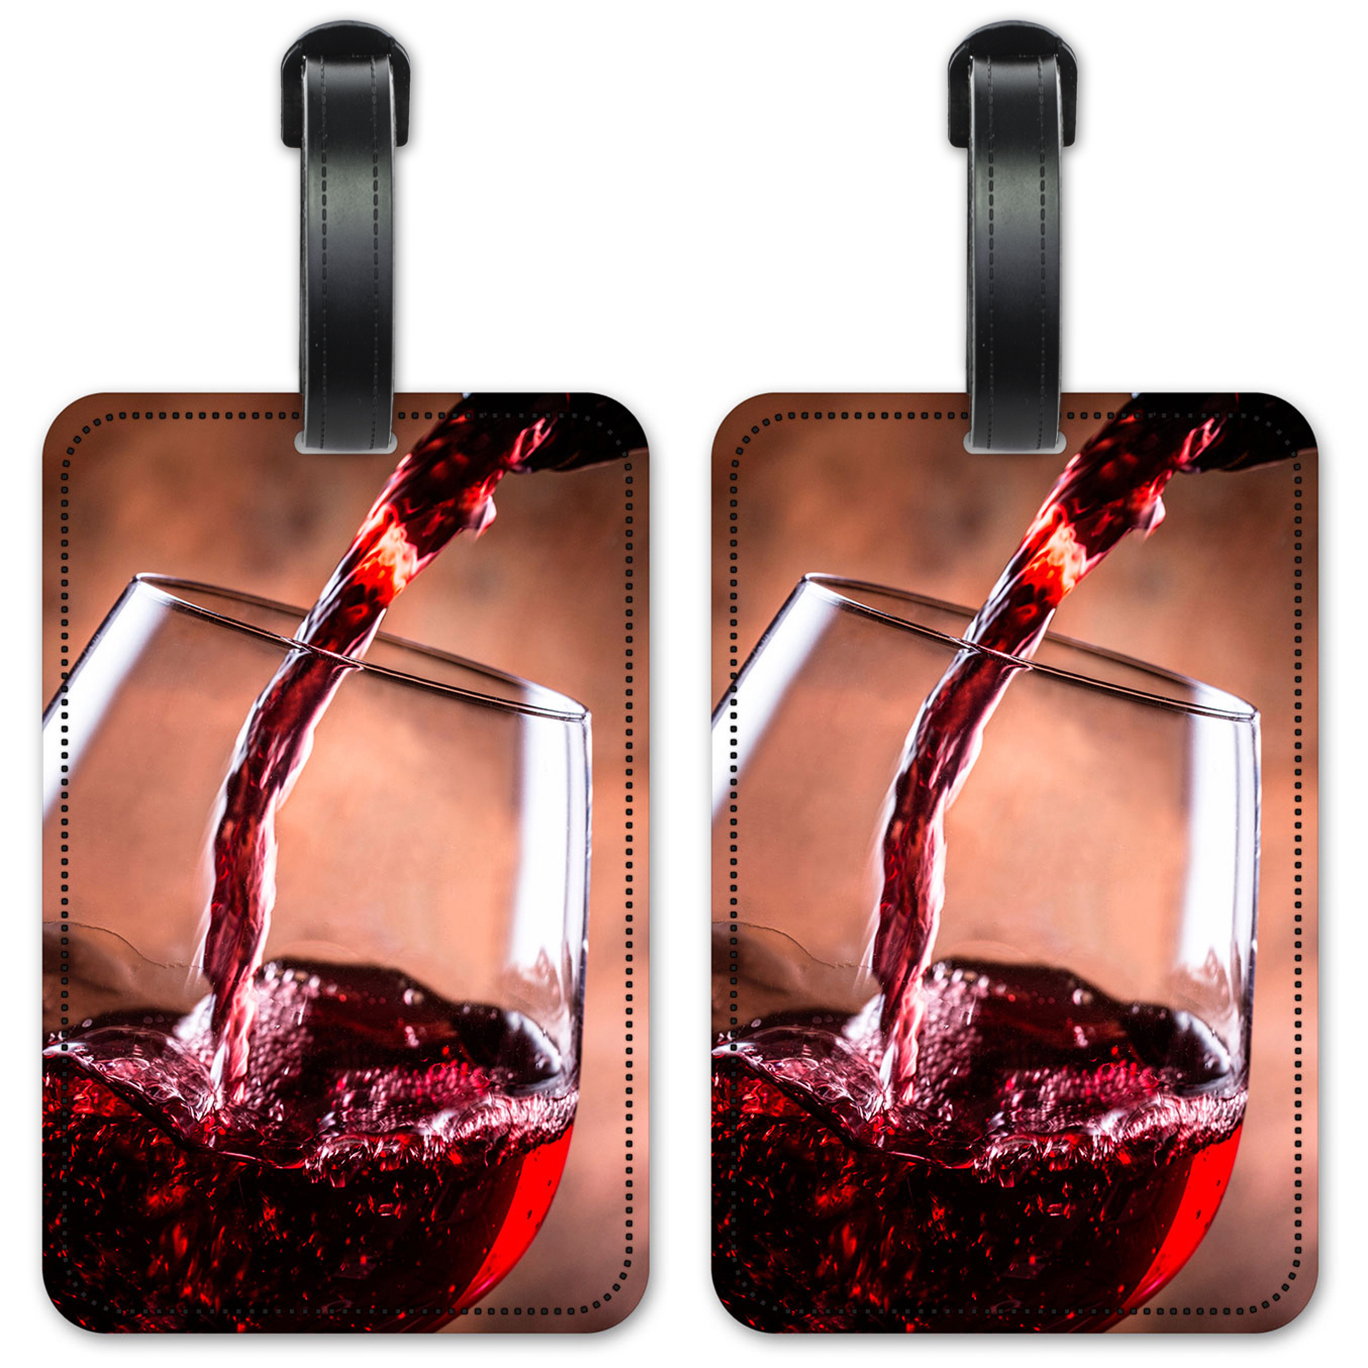 Pouring Red Wine - #3135